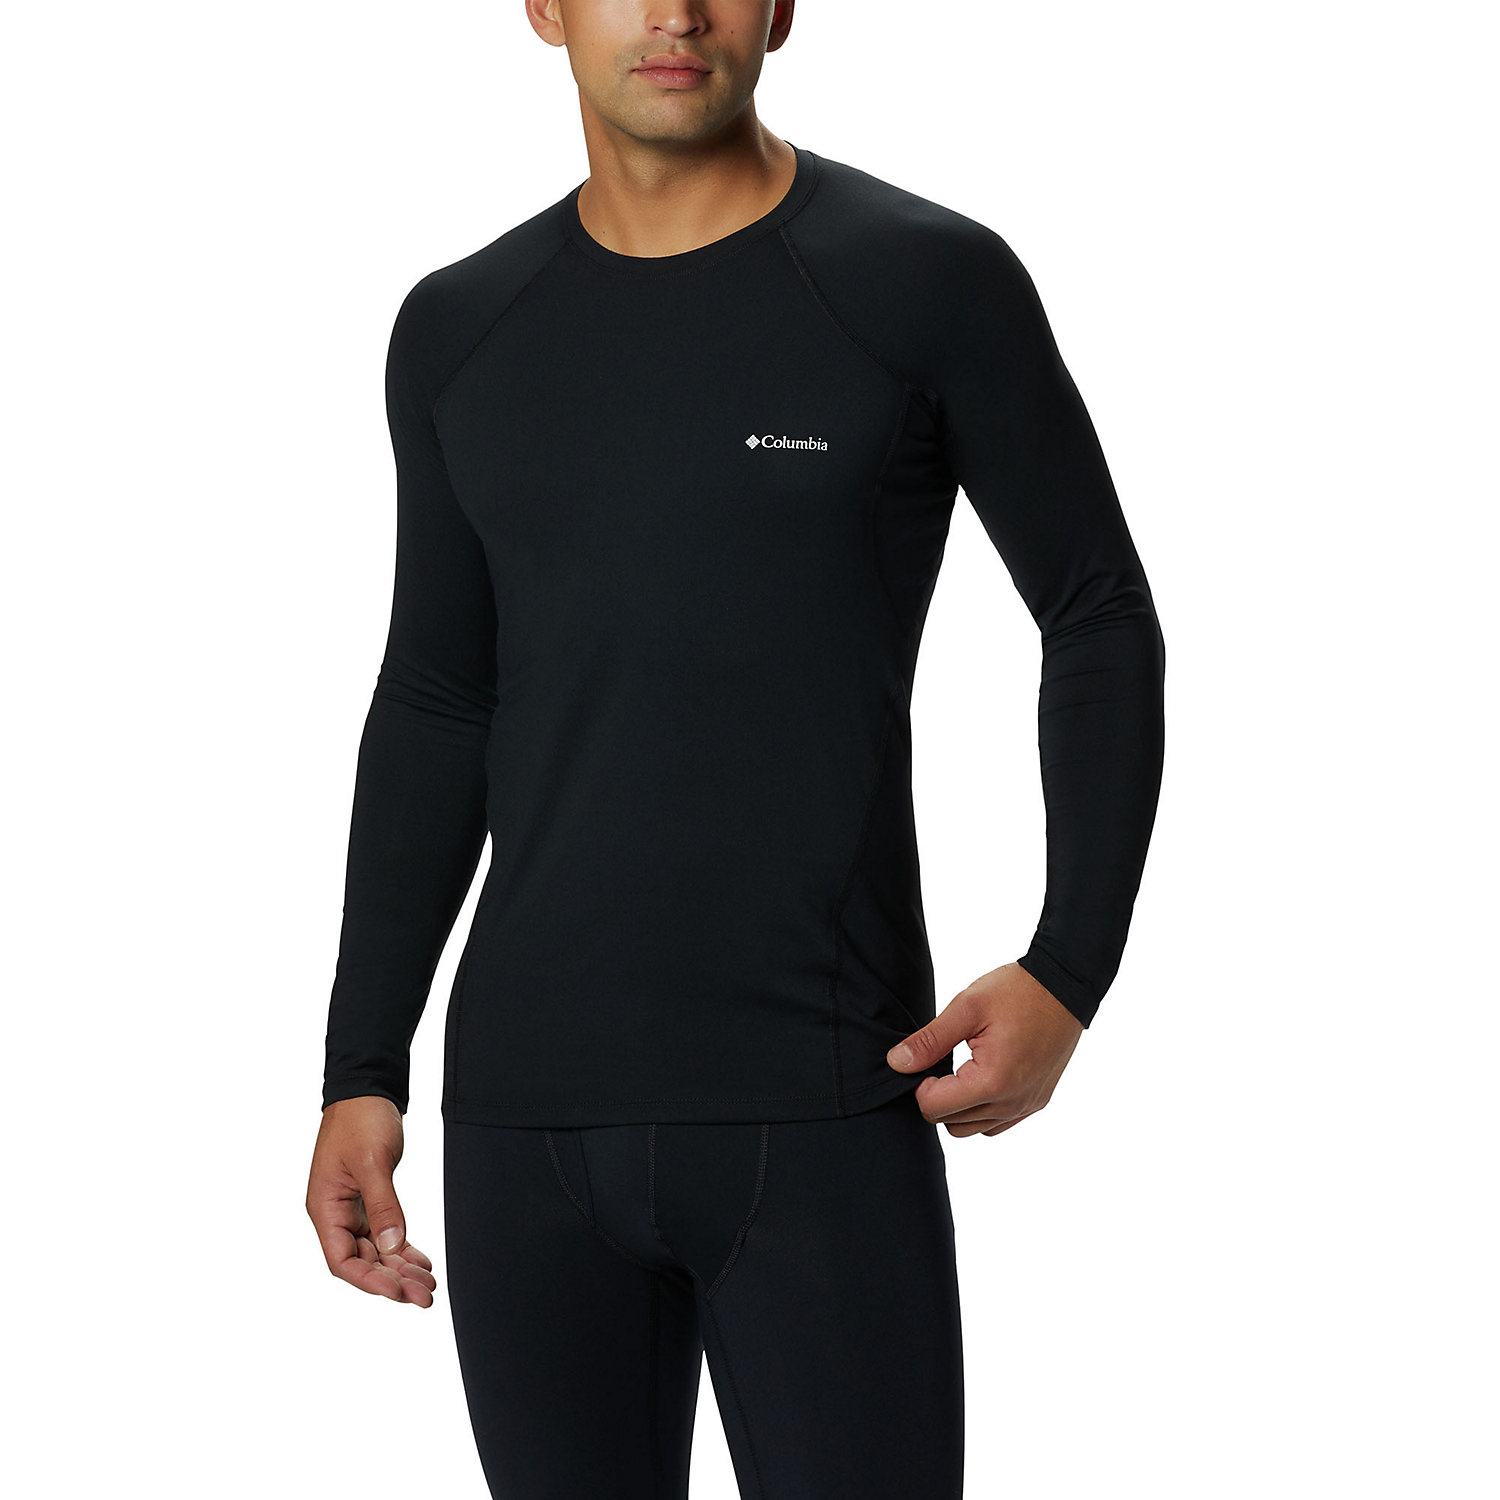 Columbia Mens Midweight Stretch Long Sleeve Top